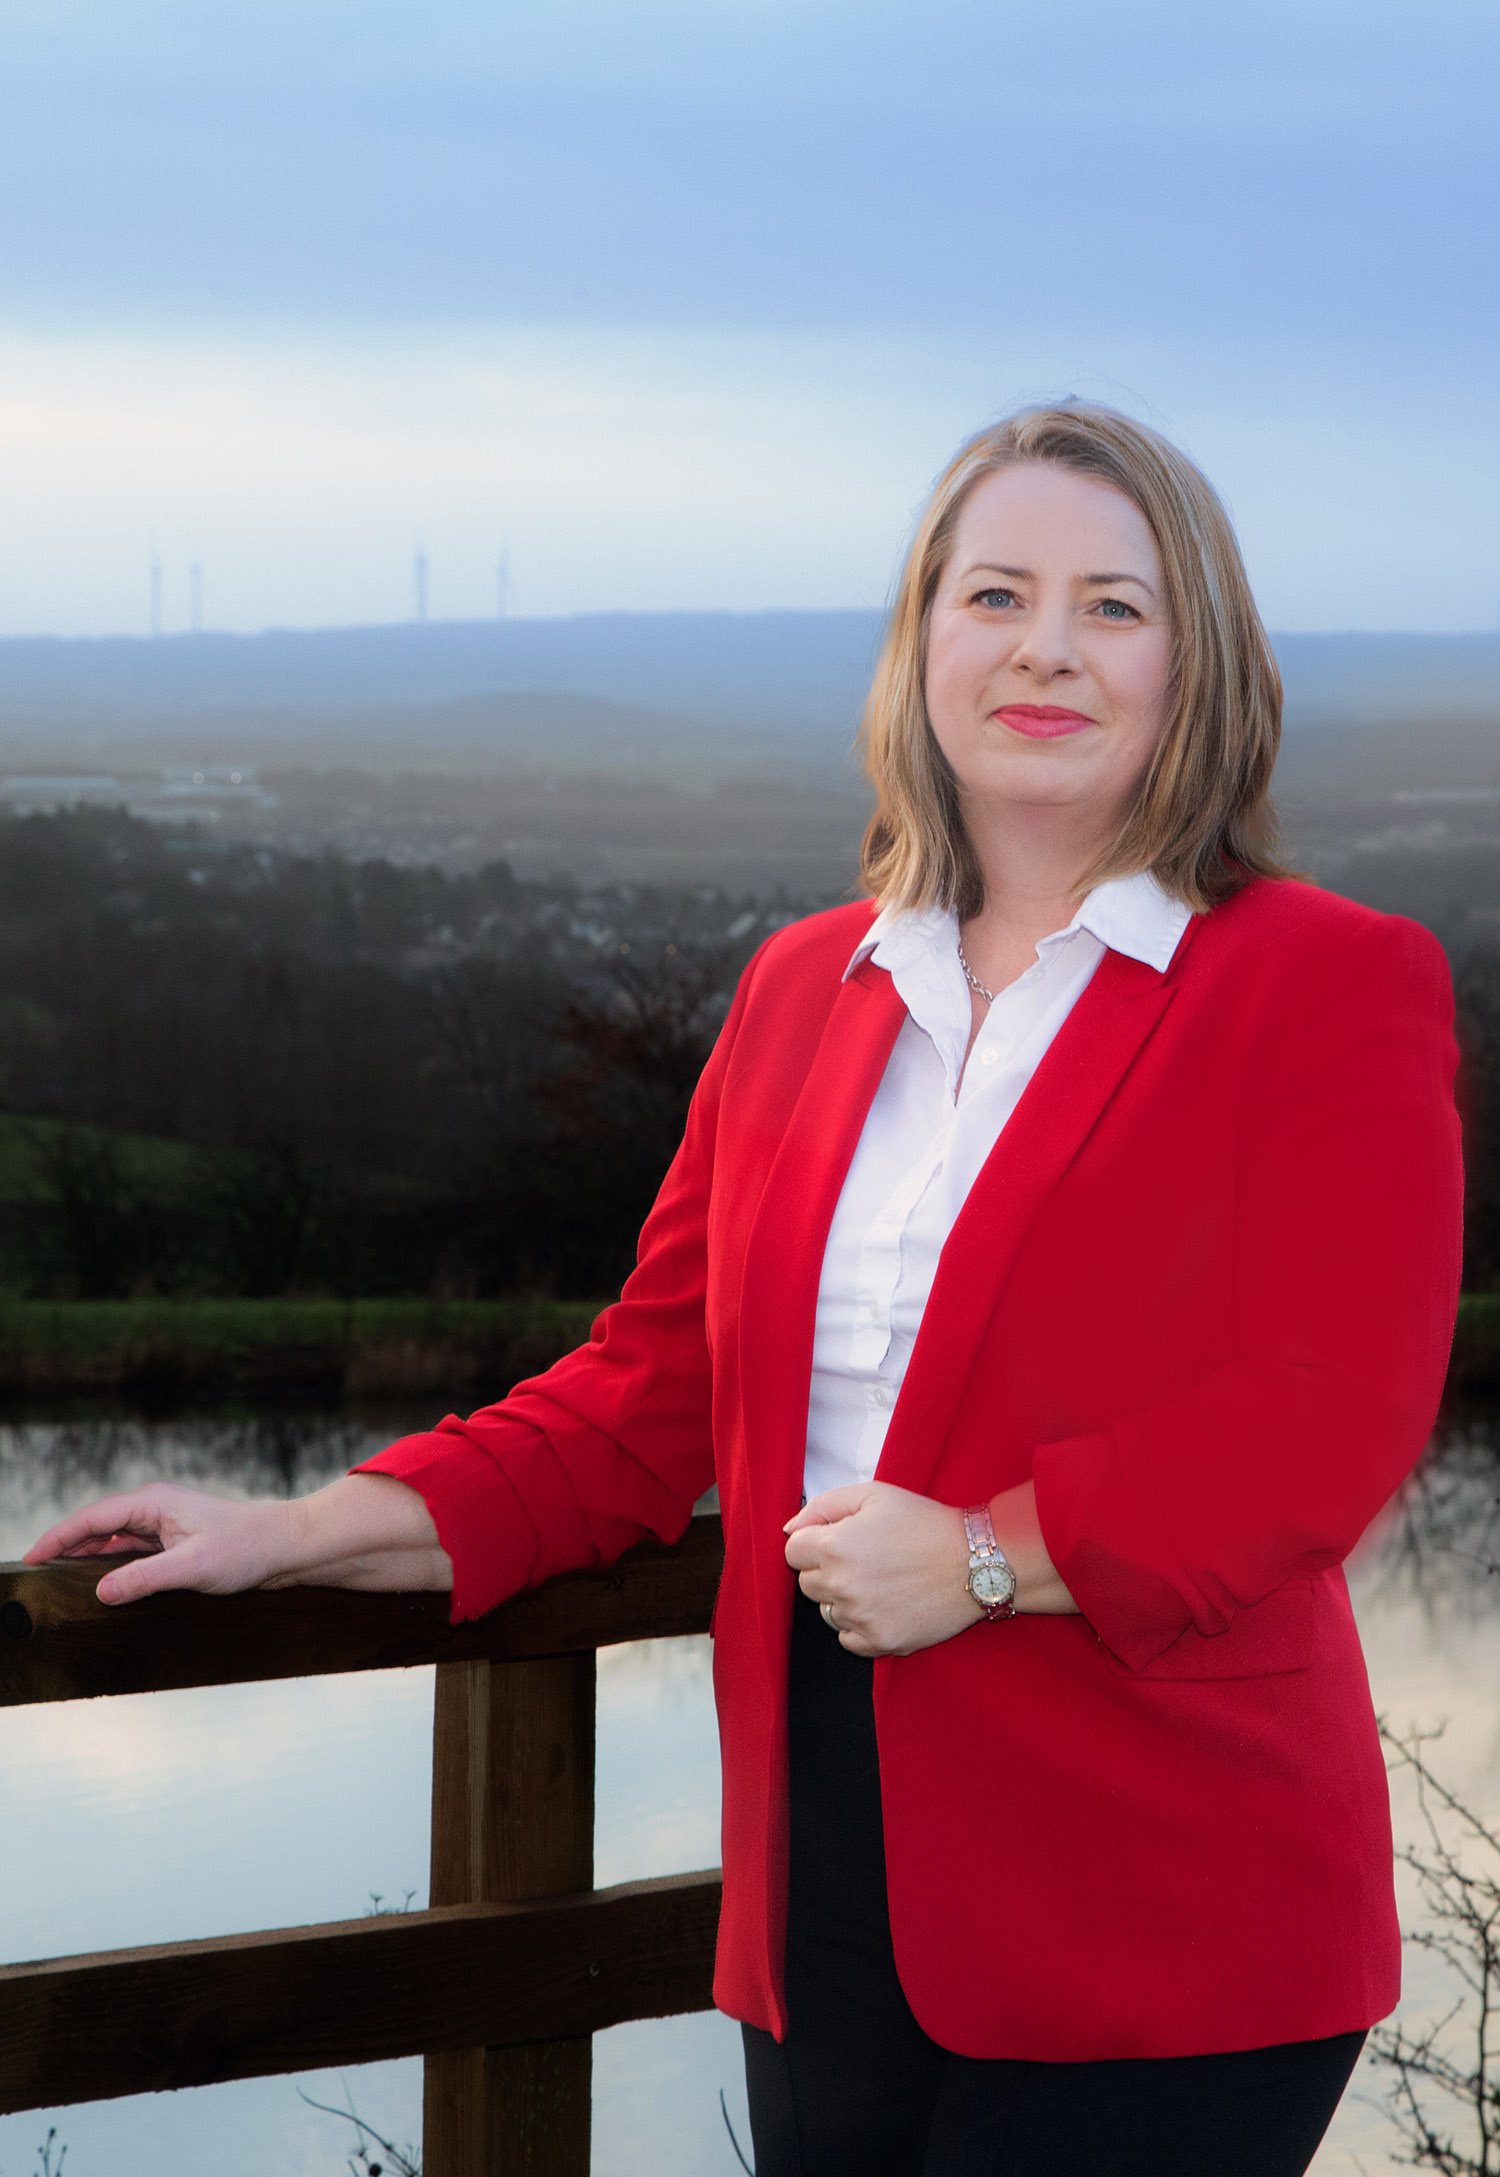 Kirsteen Sullivan, Falkirk Labour candidate for Bathgate and Linlightgow